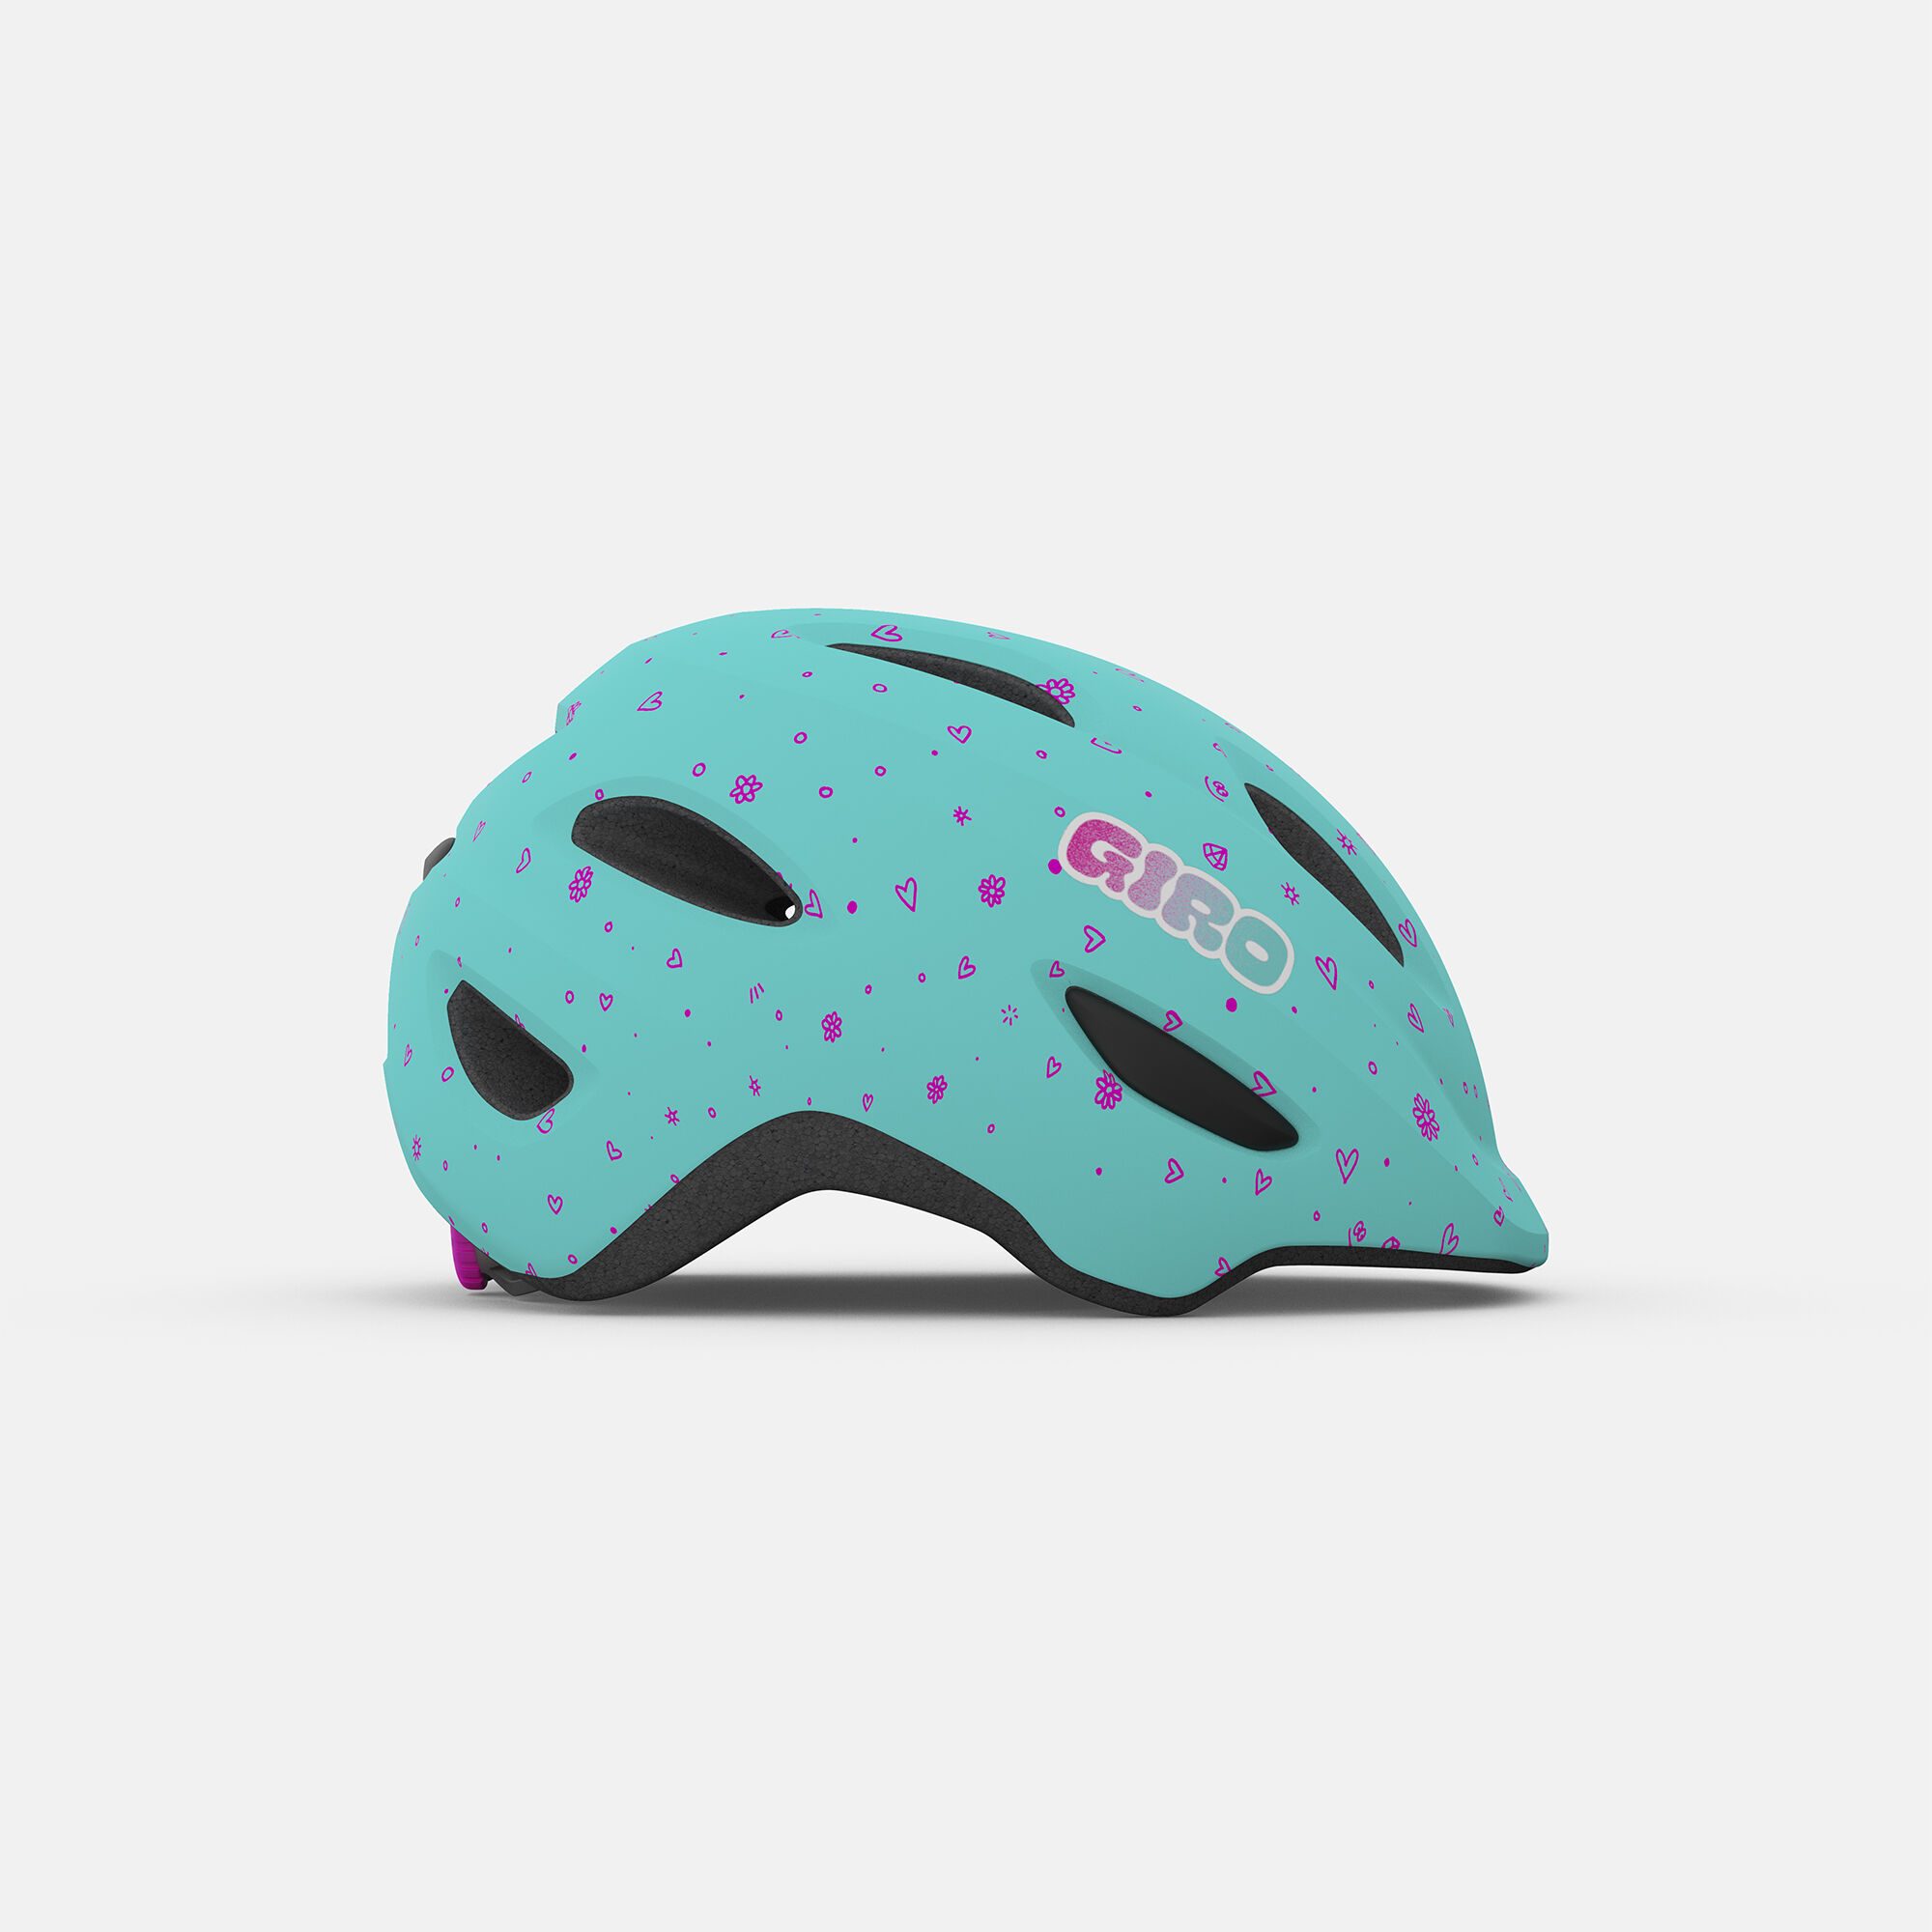 Giro Scamp Youth Kids Junior Helmet Adults Cycling Head Protection 